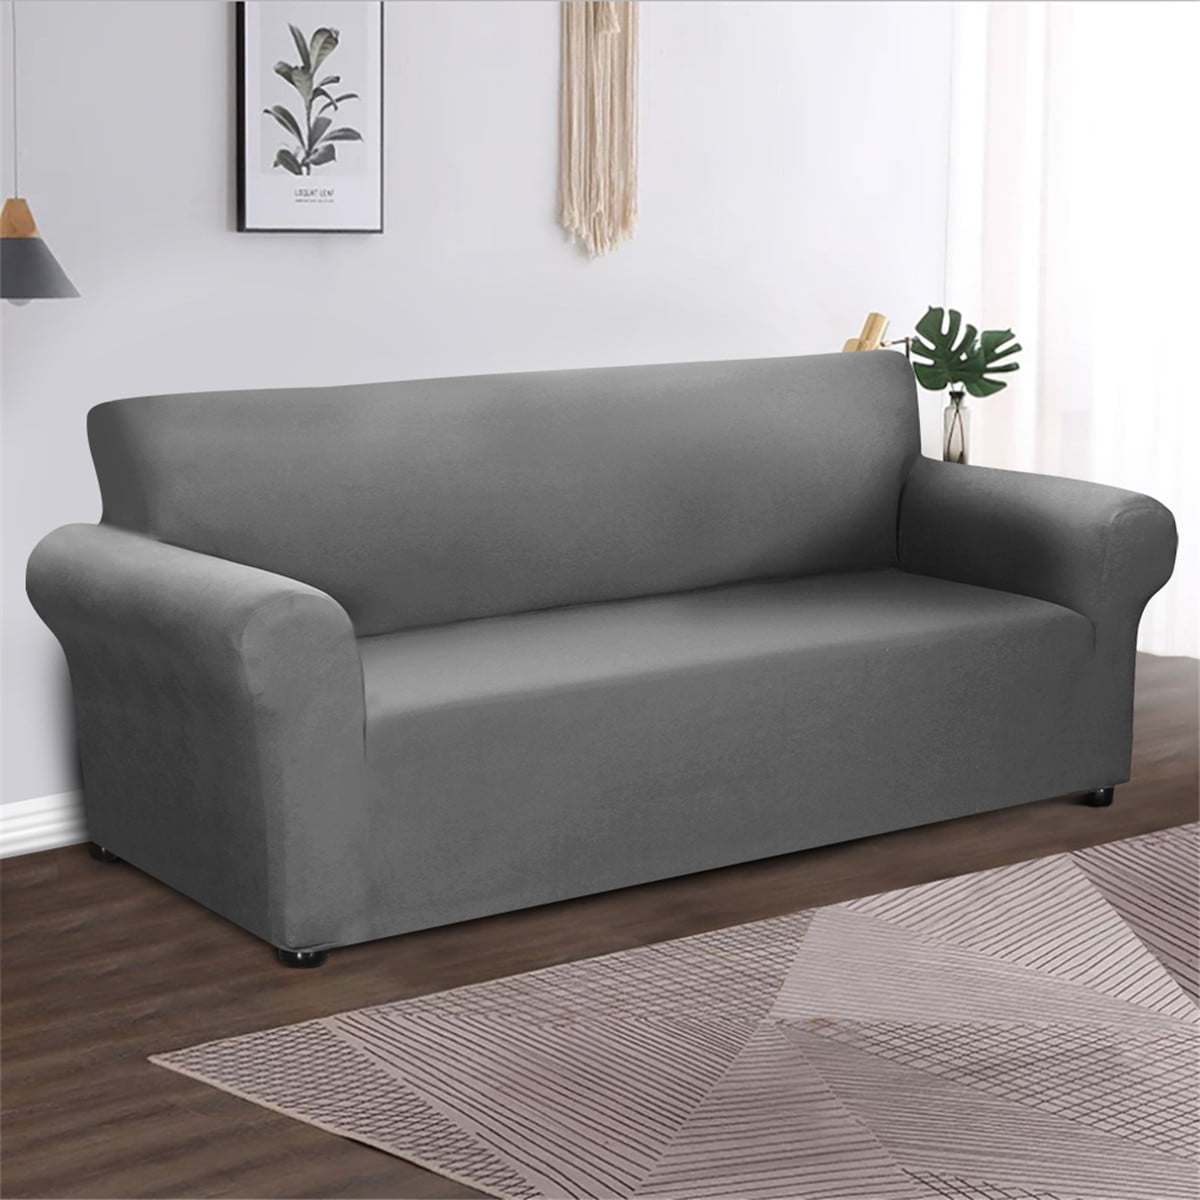 1-4 Seater Elastic Sofa Cover Slipcover Couch Stretch Arm Chair Loveseat Home US 